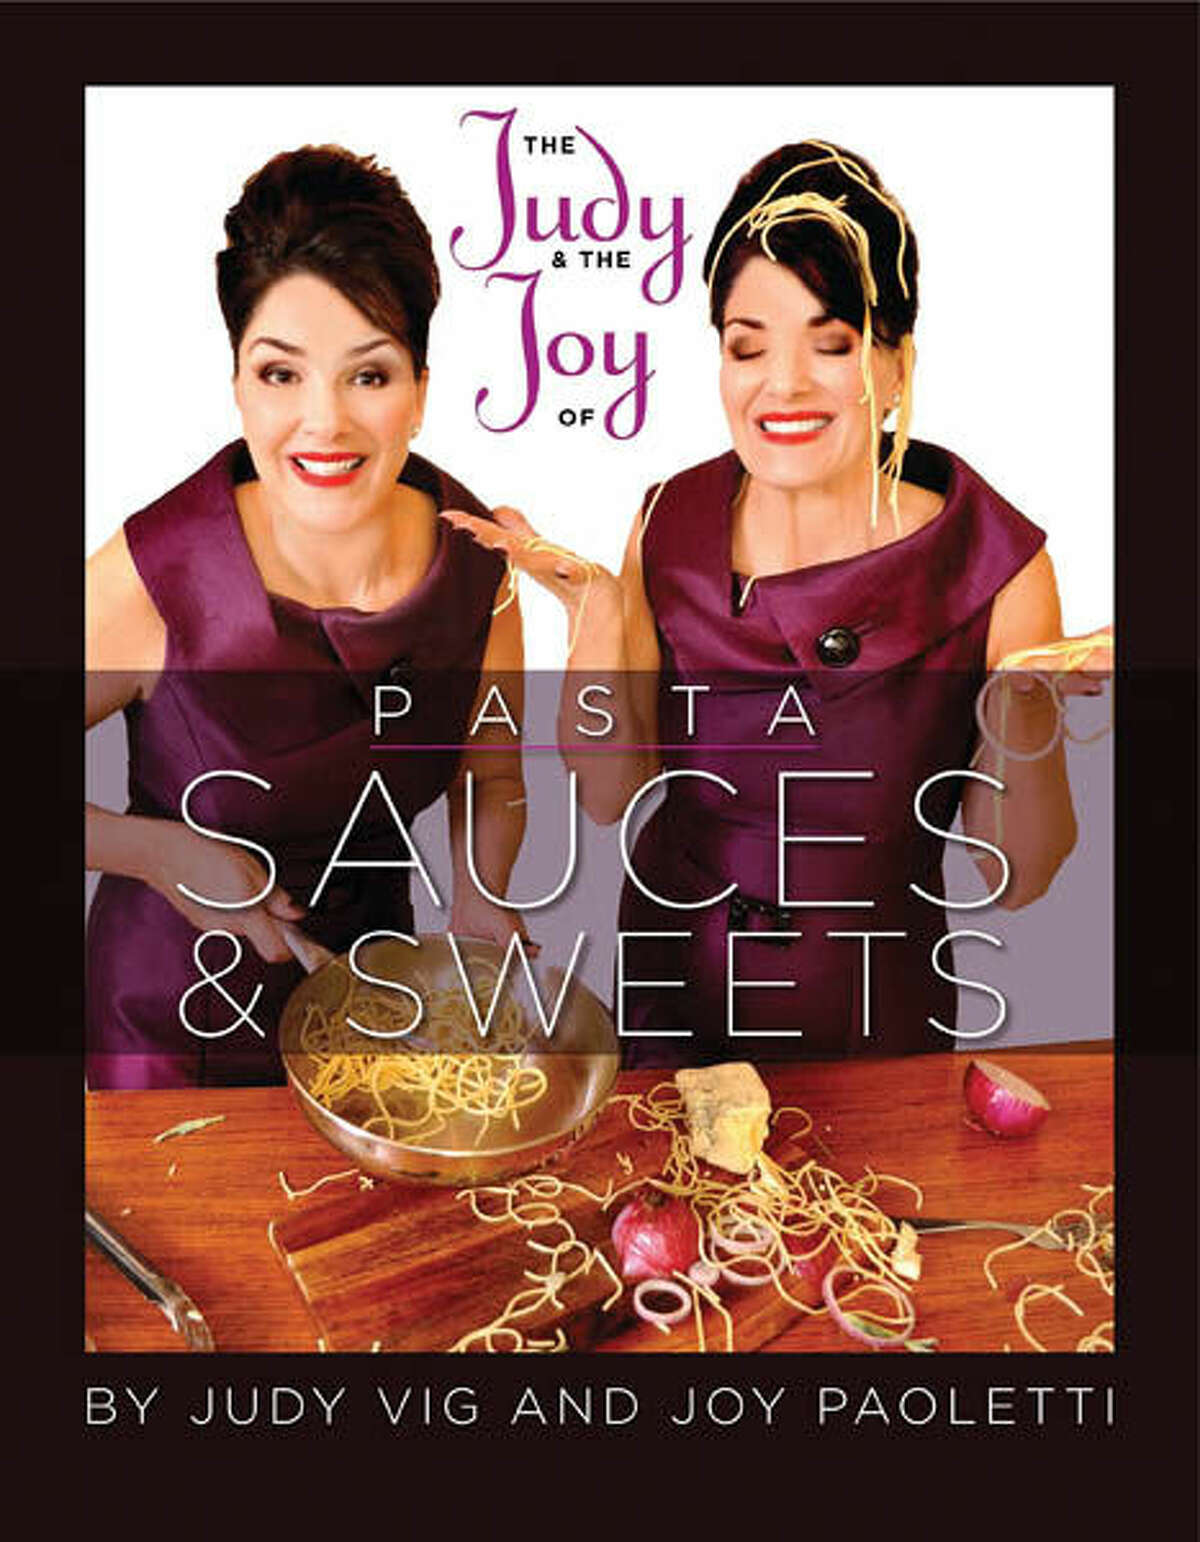 Baking experience with Trumbull-based celebrity chefs, Twins Judy & Joy, $500, includes in-house cookie baking demonstration, a copy of their new cookbook The Judy & The Joy of Pasta Sauces and Sweets, plus a tray of all the delicious cookies they make. Demo limited to six people. Contact twinsJudyandJoy@aol.com or visit the Twins Judy & Joy Facebook page.